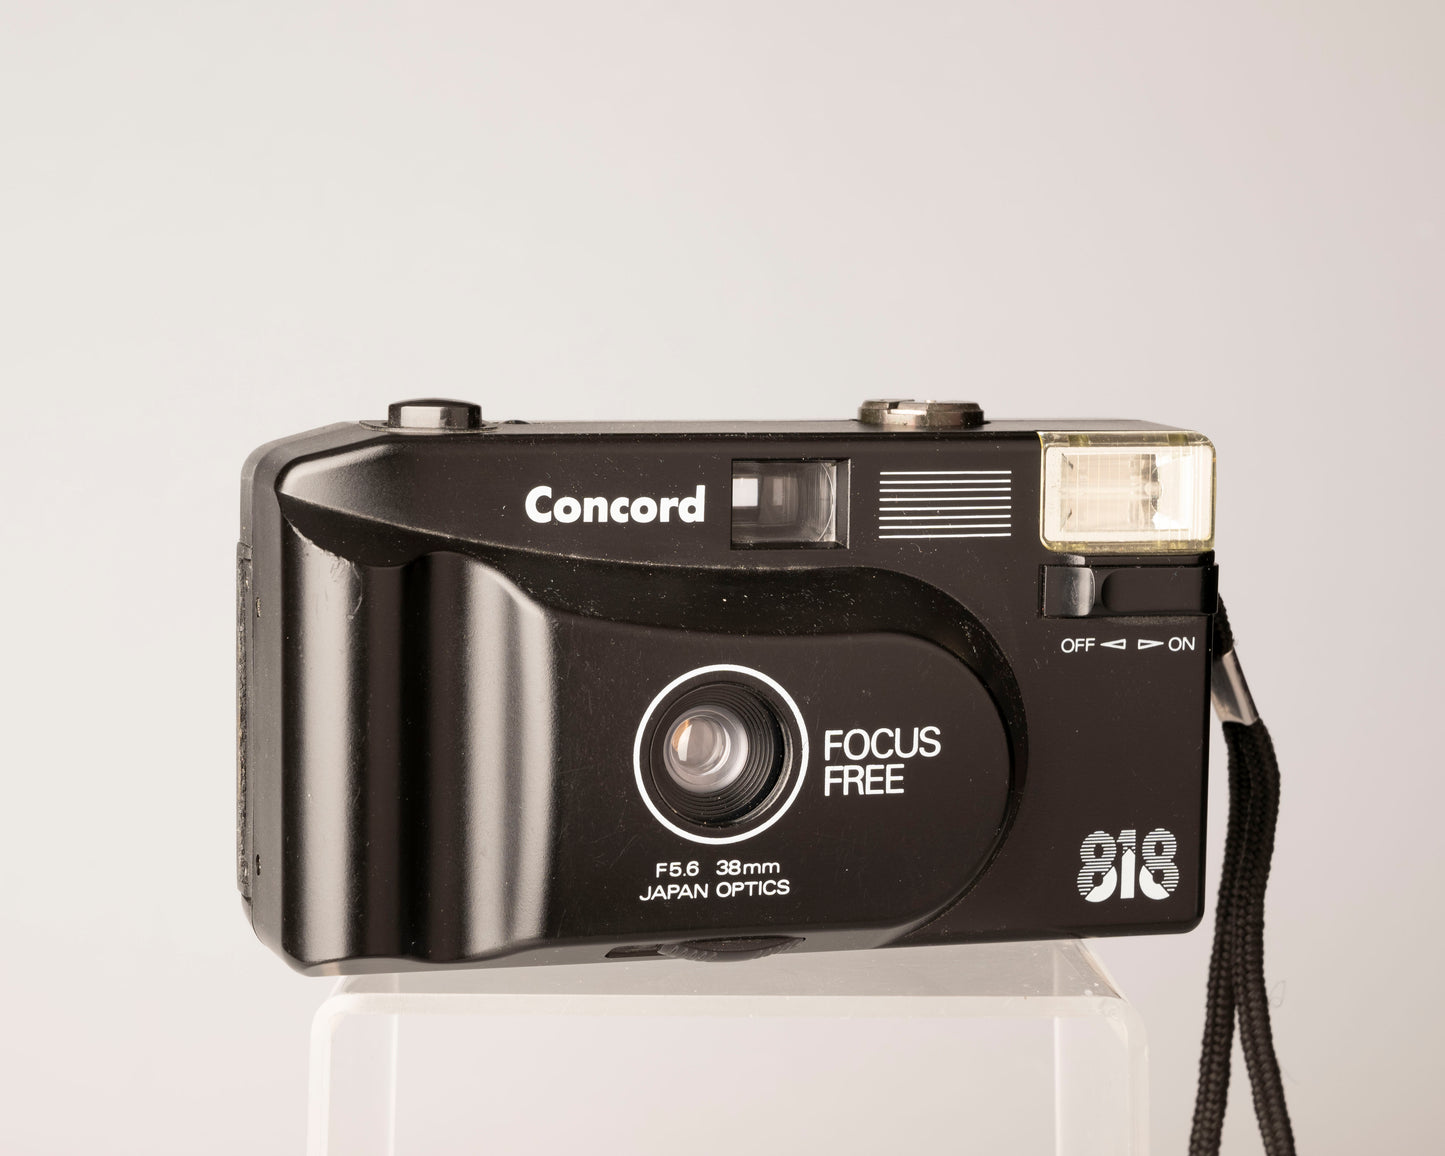 The Concord 818 Focus Free is a simple 35mm camera from the 1980s featuring a 38mm f5.6 lens